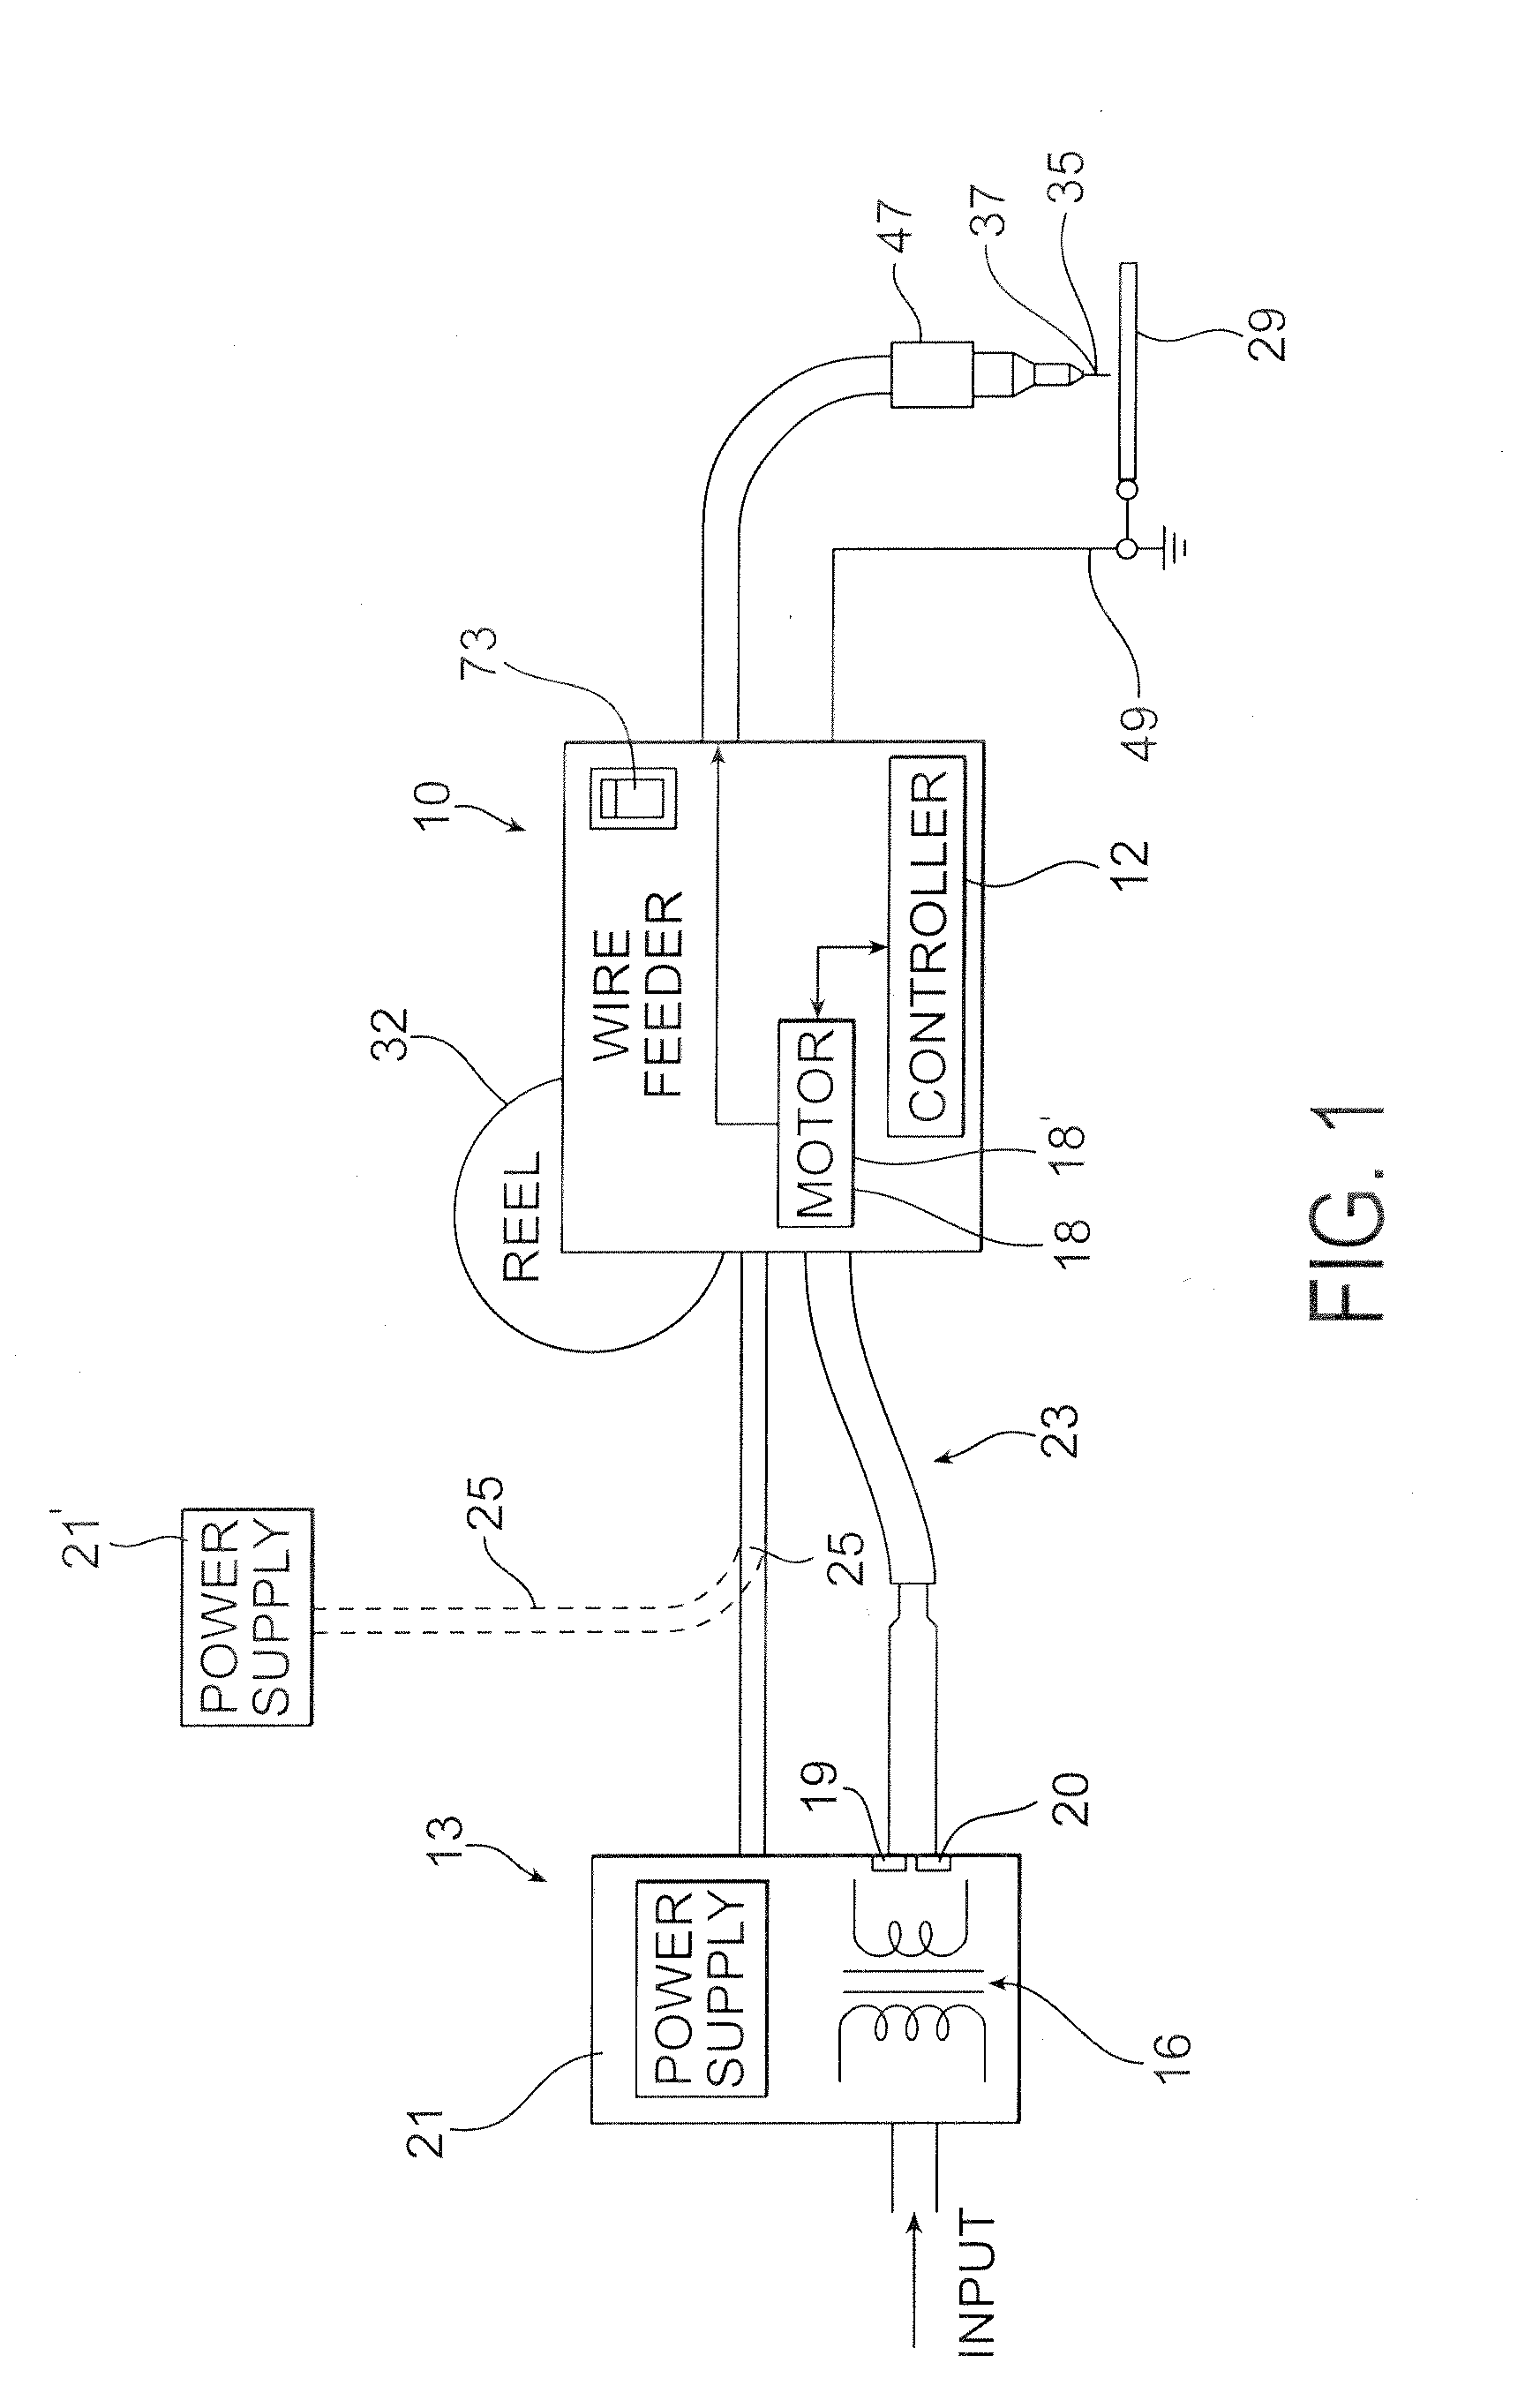 Wire feeder with auto-configure power supply